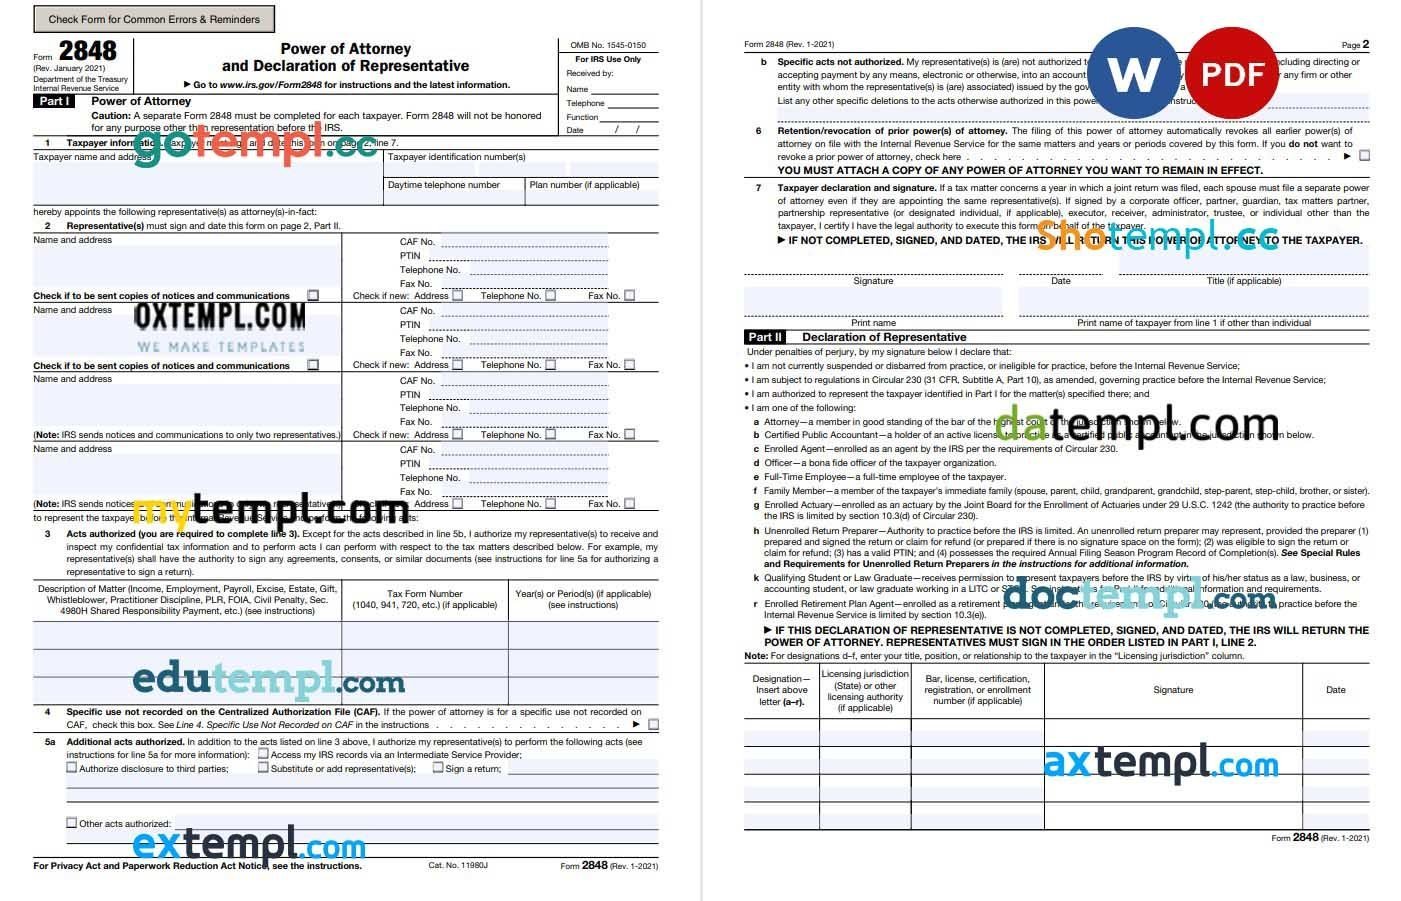 IRS Power of Attorney Form example, fully editable